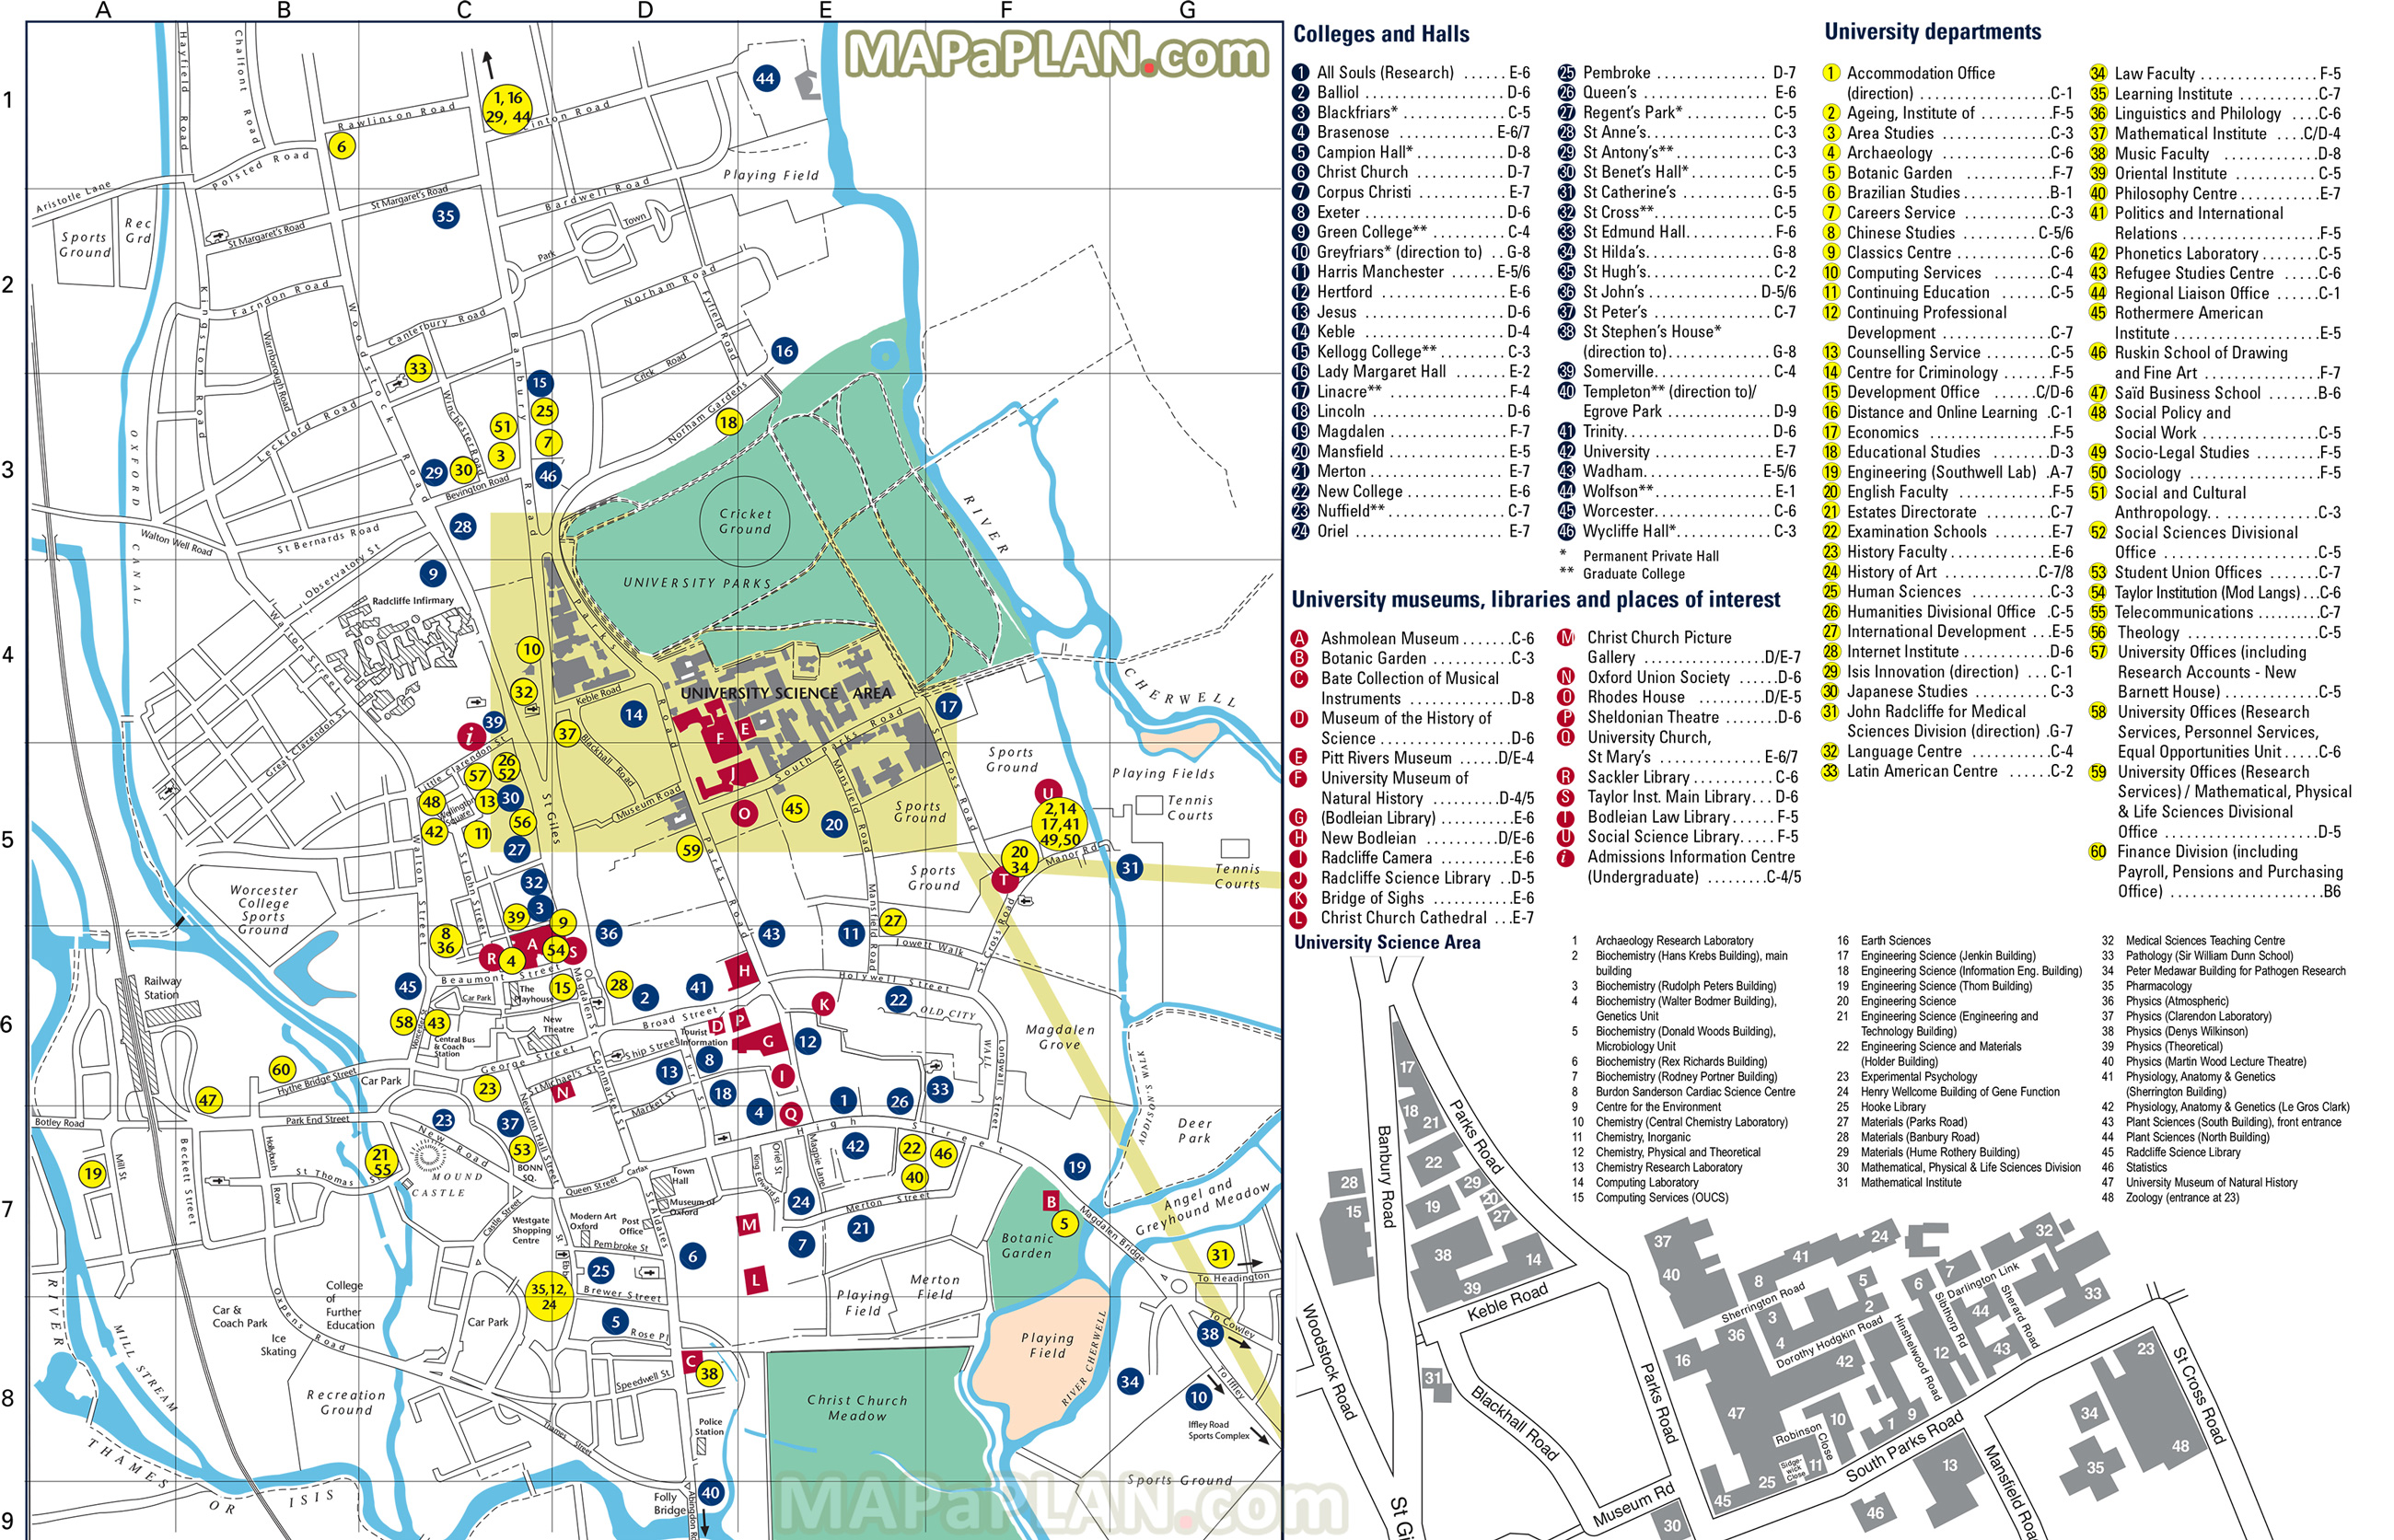 oxford-top-tourist-attractions-map-03-oxford-university-natural-history